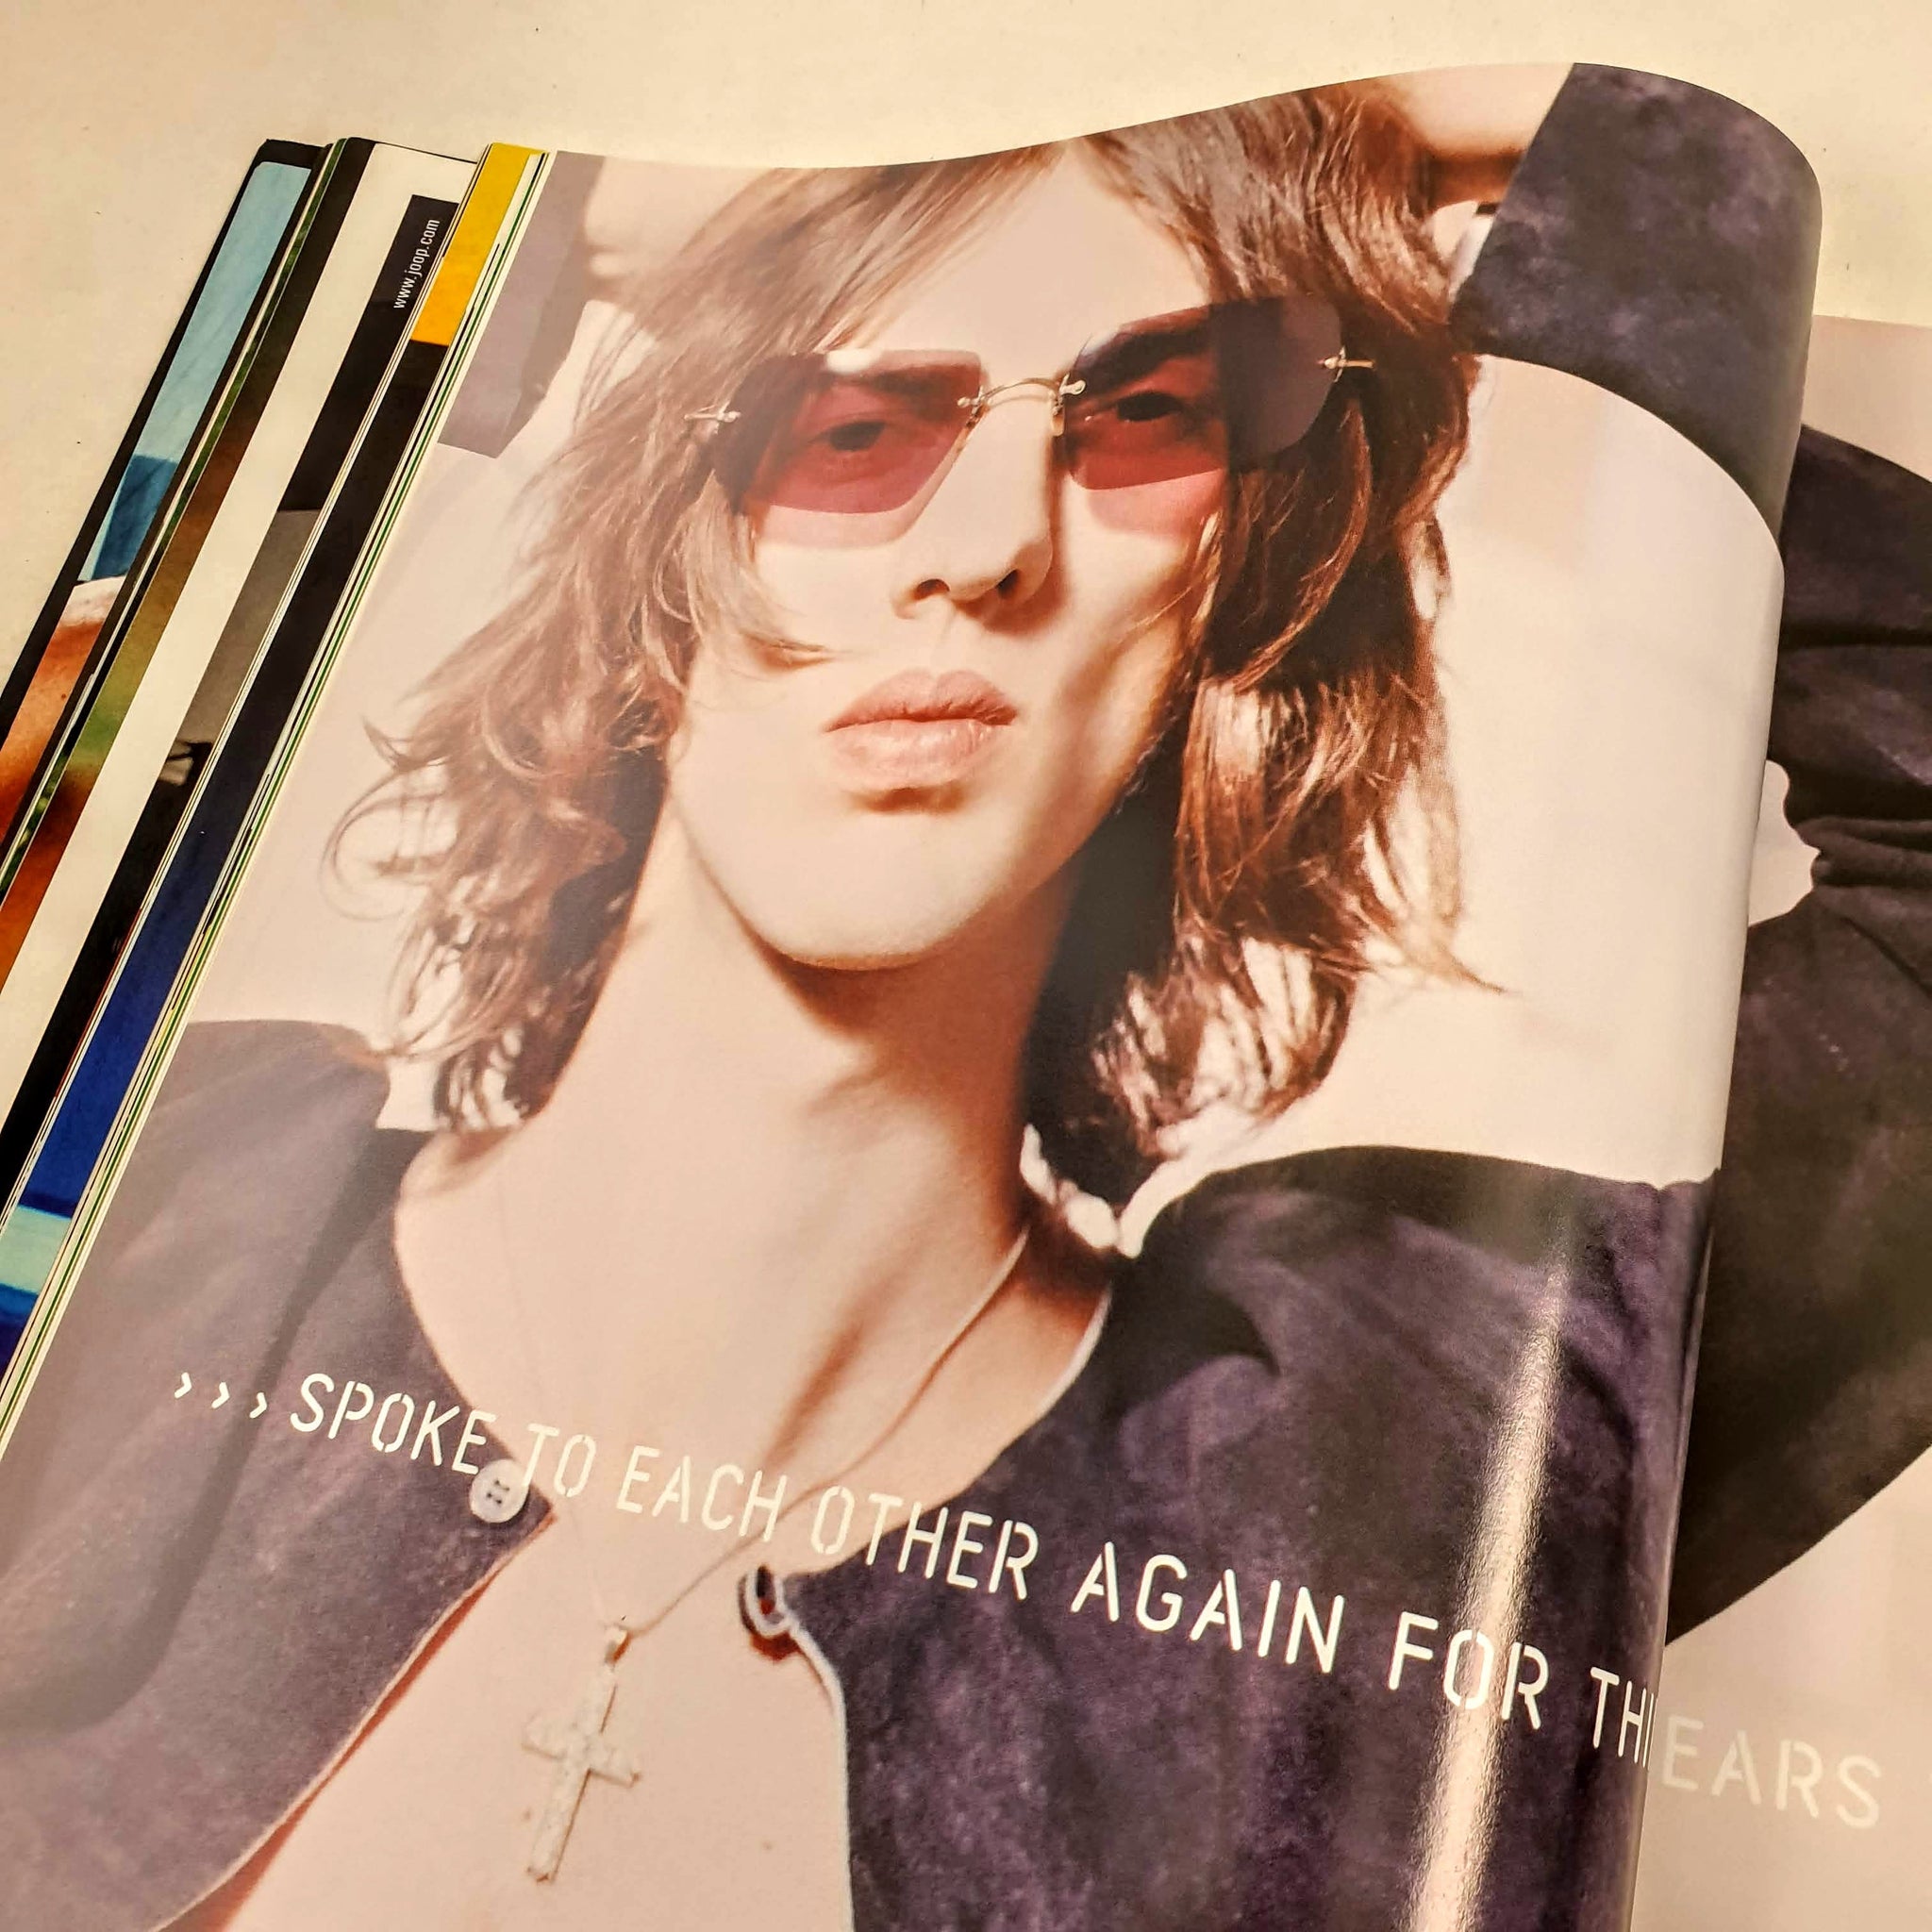 The Face - March 2000 (Richard Ashcroft) – Blicero Books